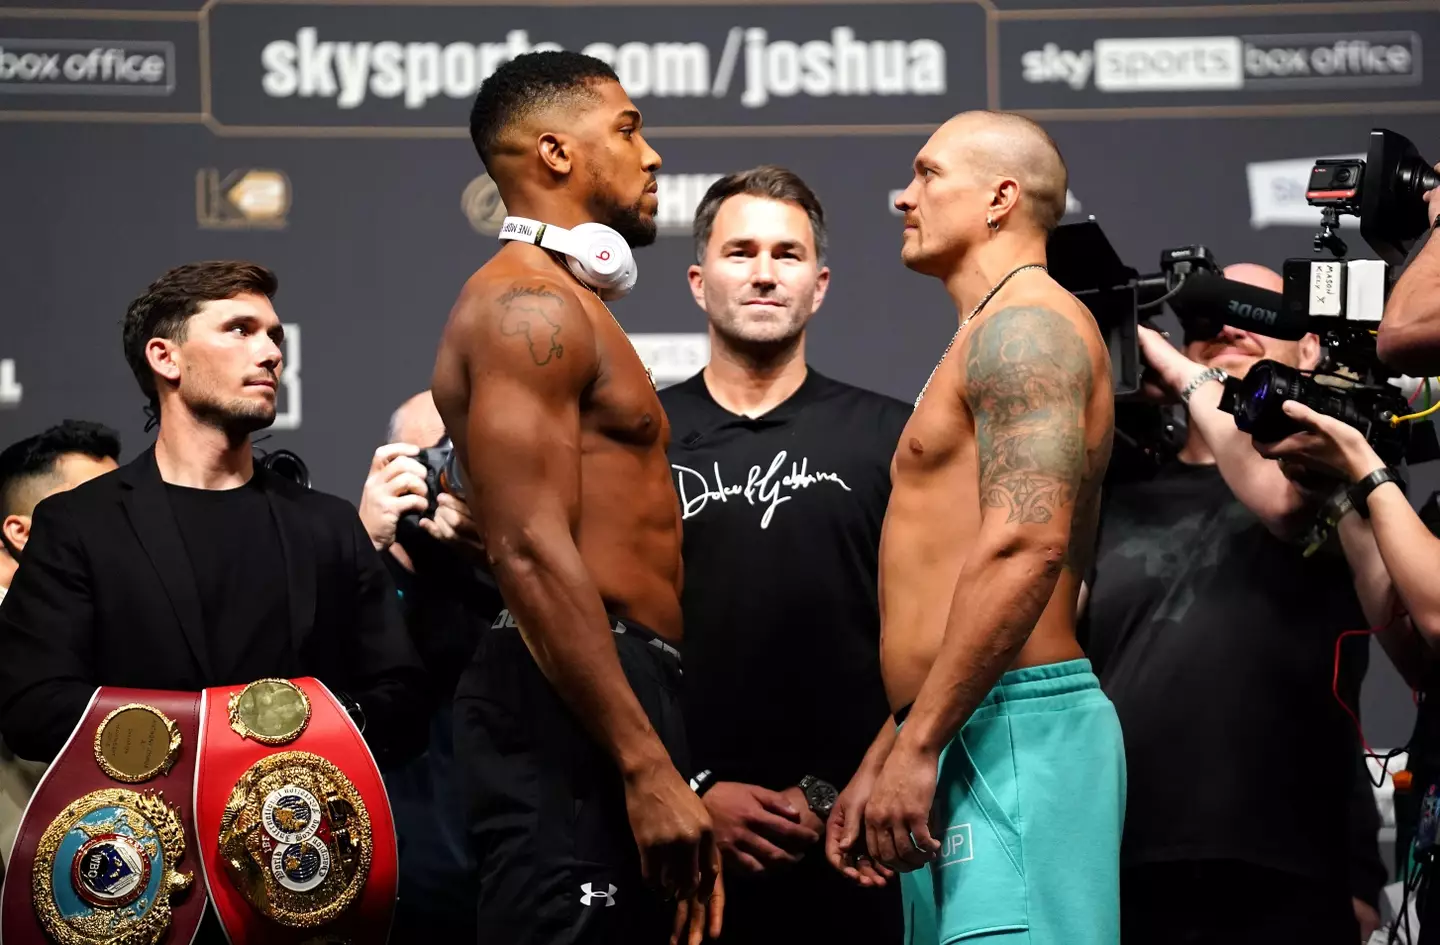 Usyk and Joshua’s rematch will likely take place in June or July.